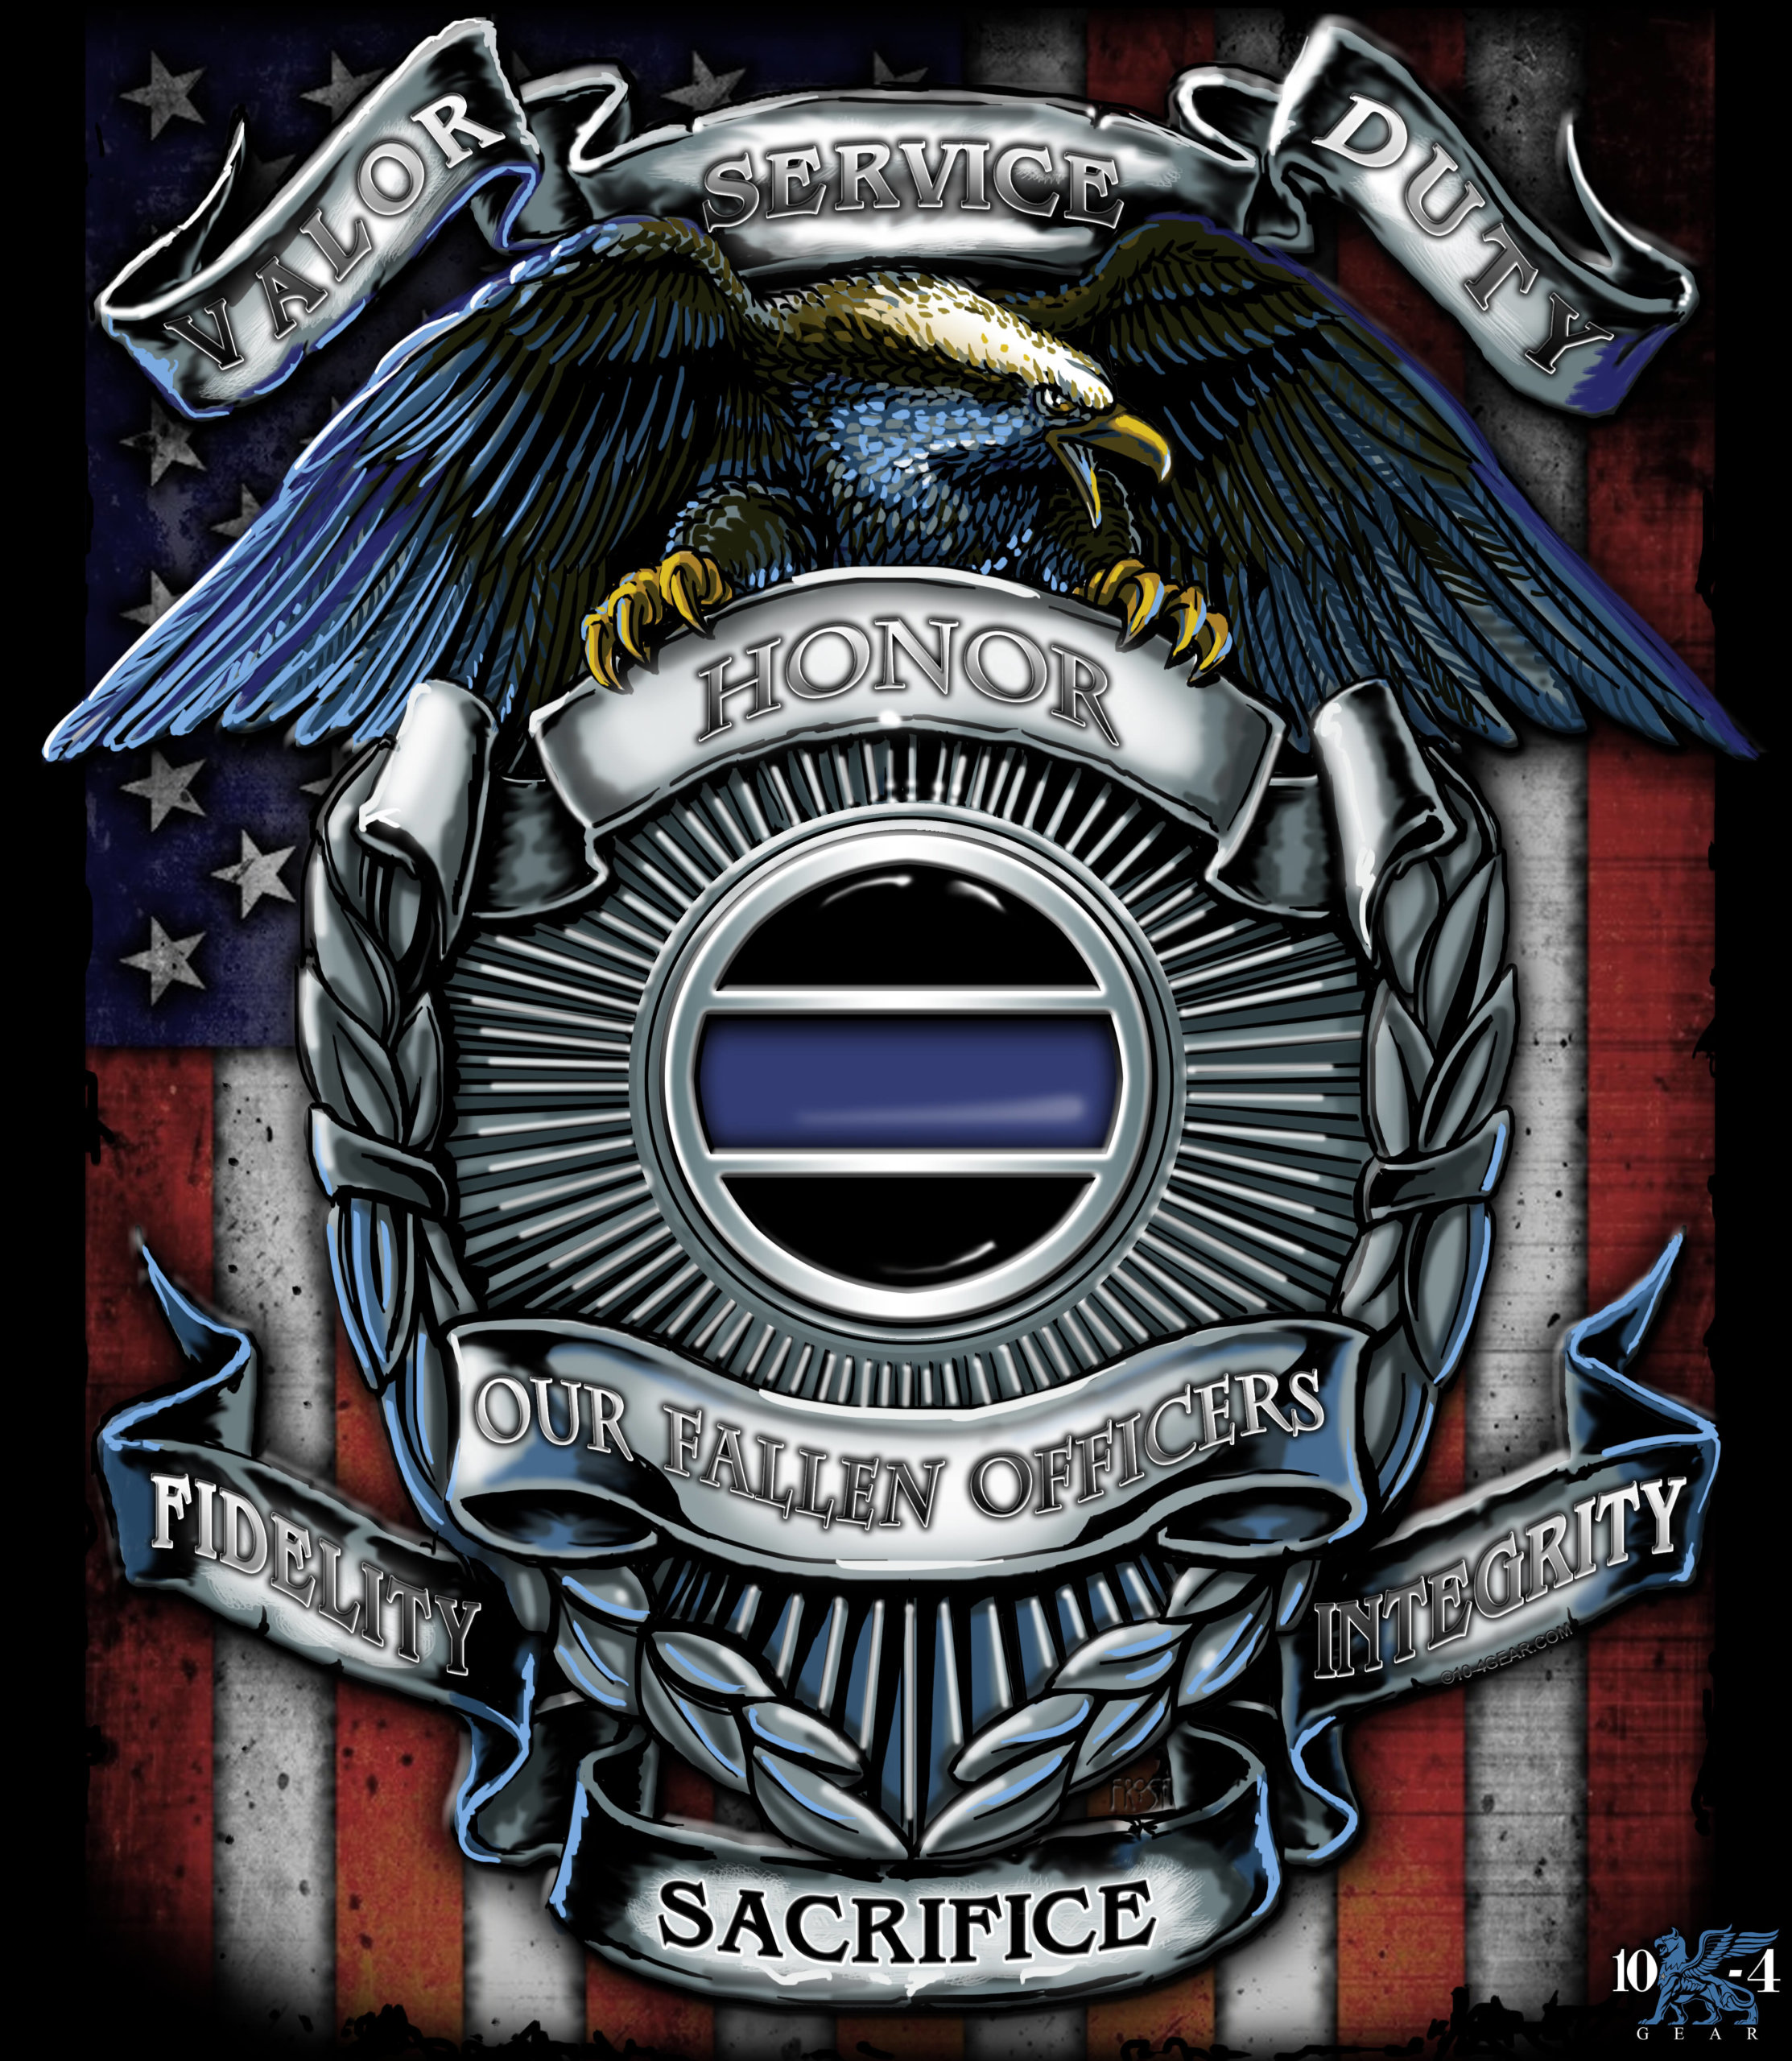 End of Watch Memorial Police Decal 100 Made in USA